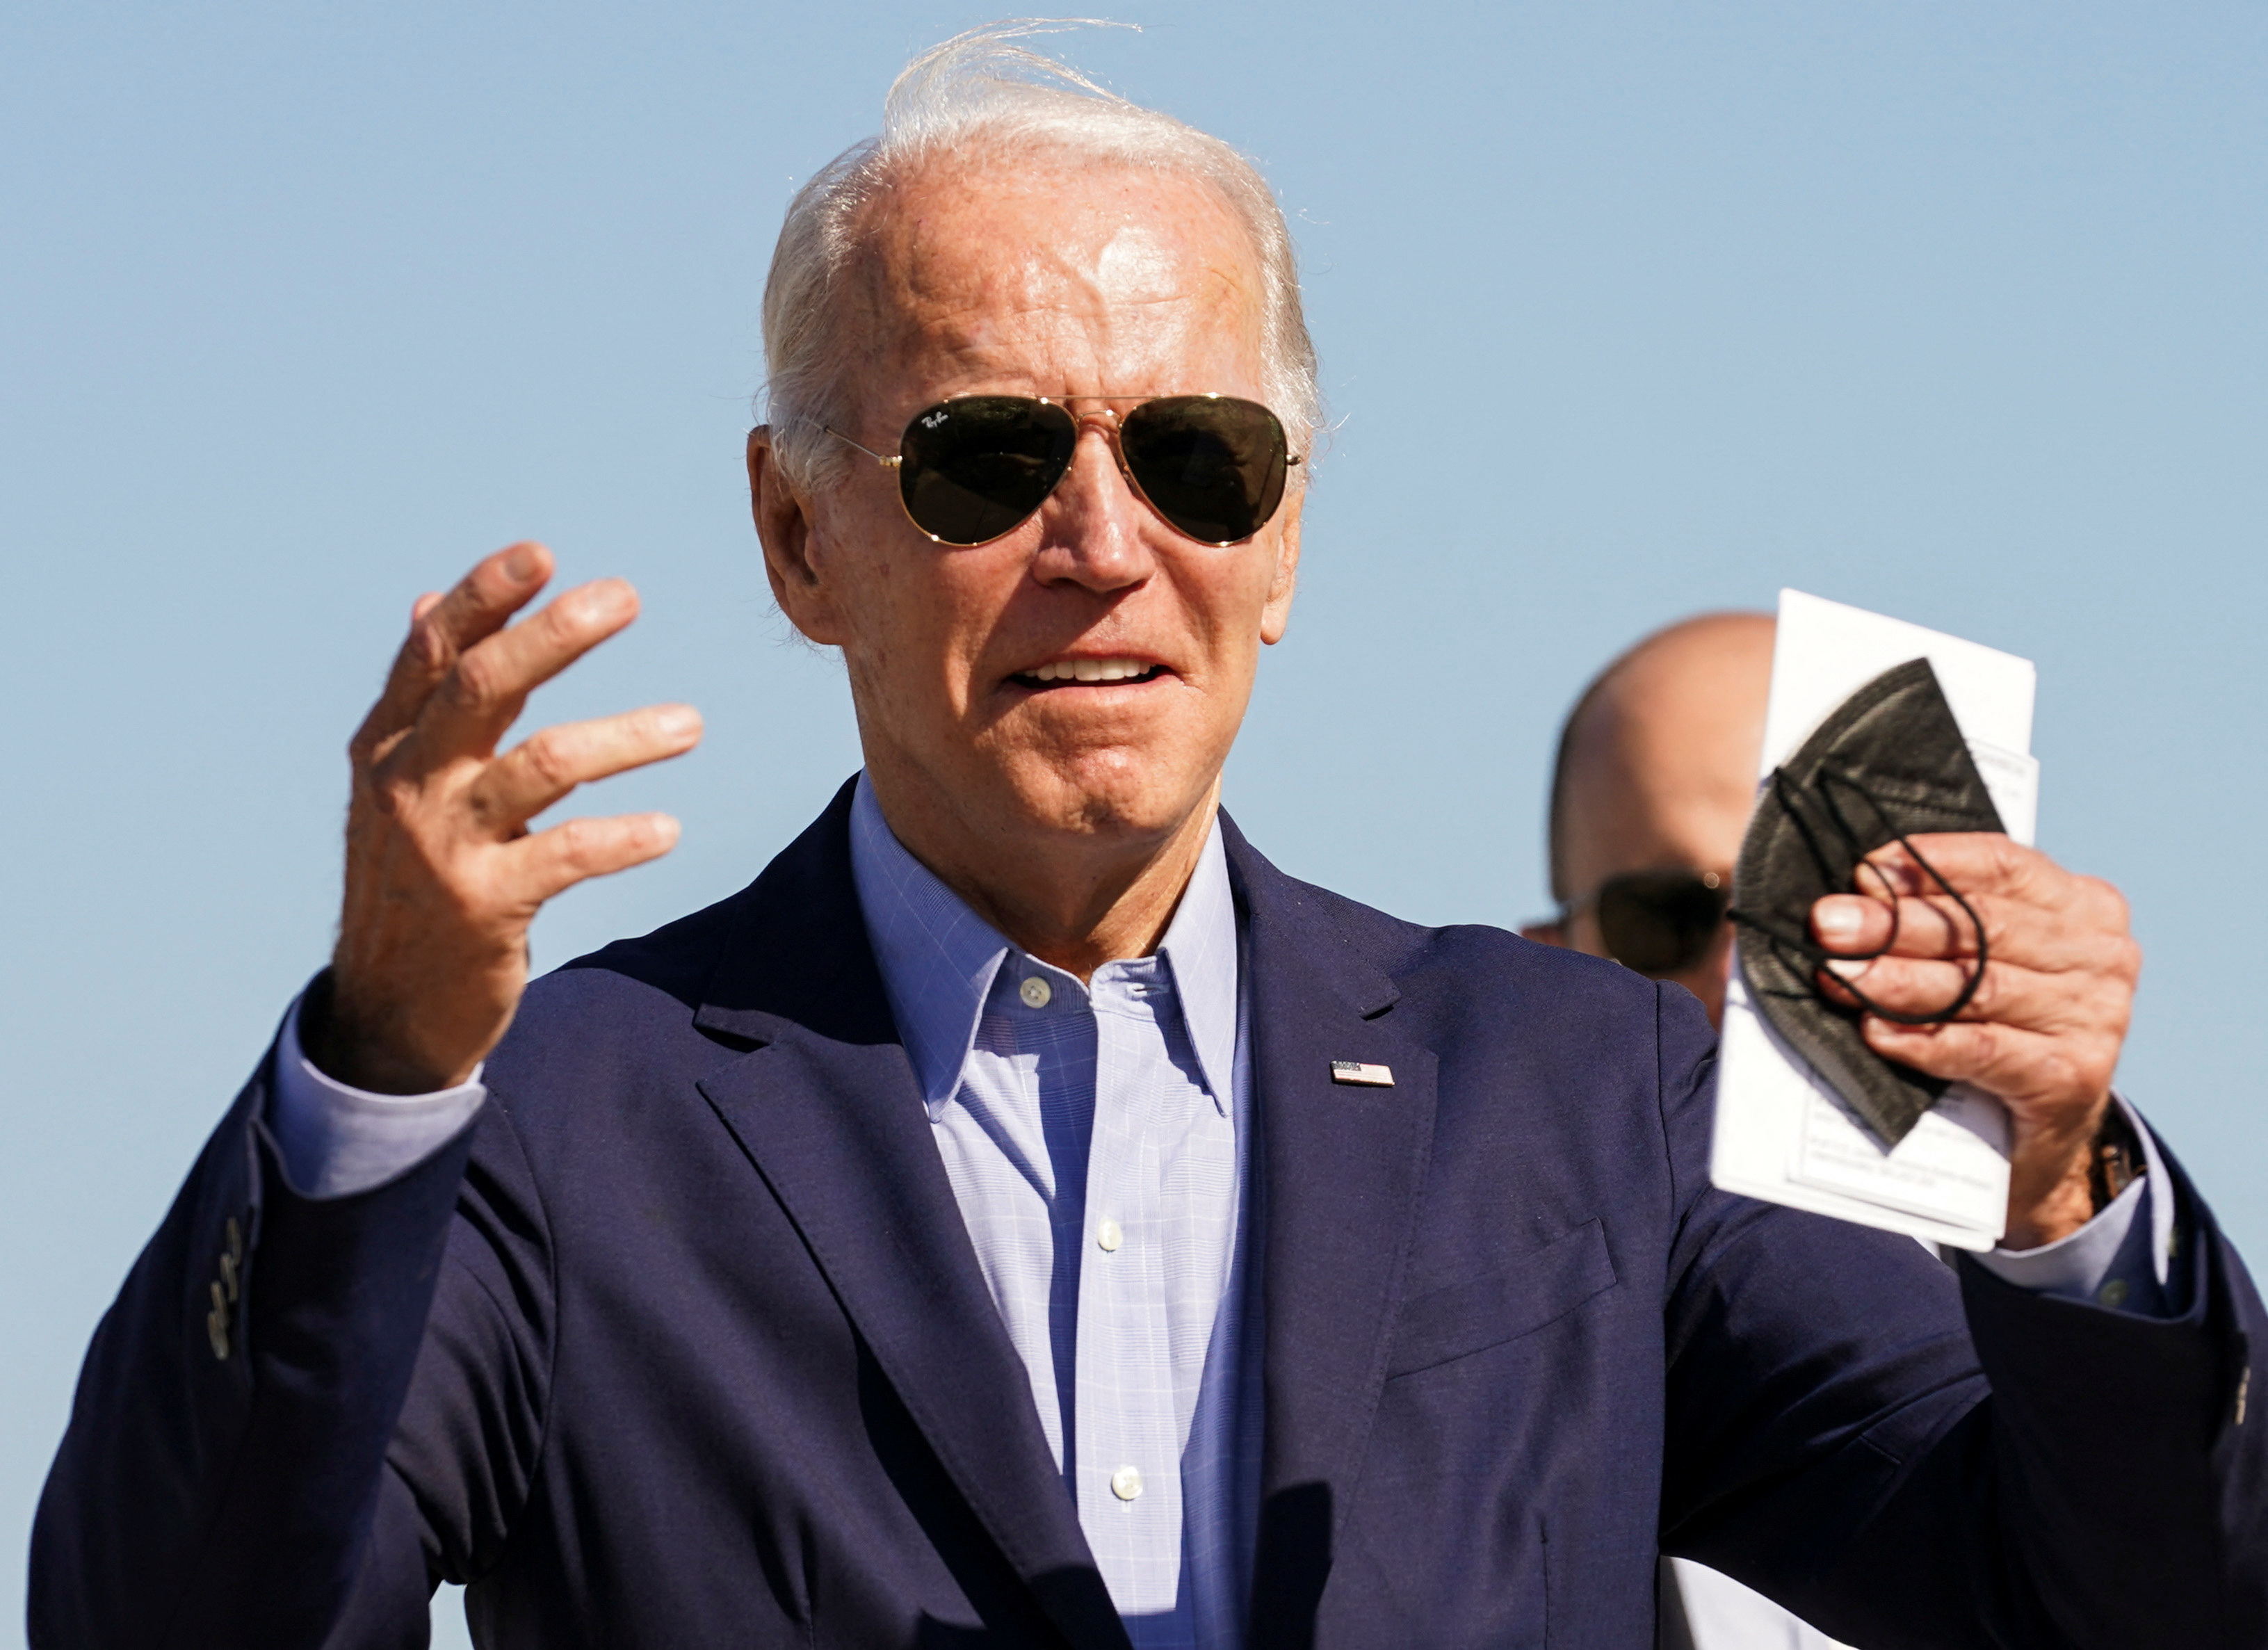 U.S. President Joe Biden departs Delaware on travel to eastern Kentucky to visit families affected by devastation from recent flooding